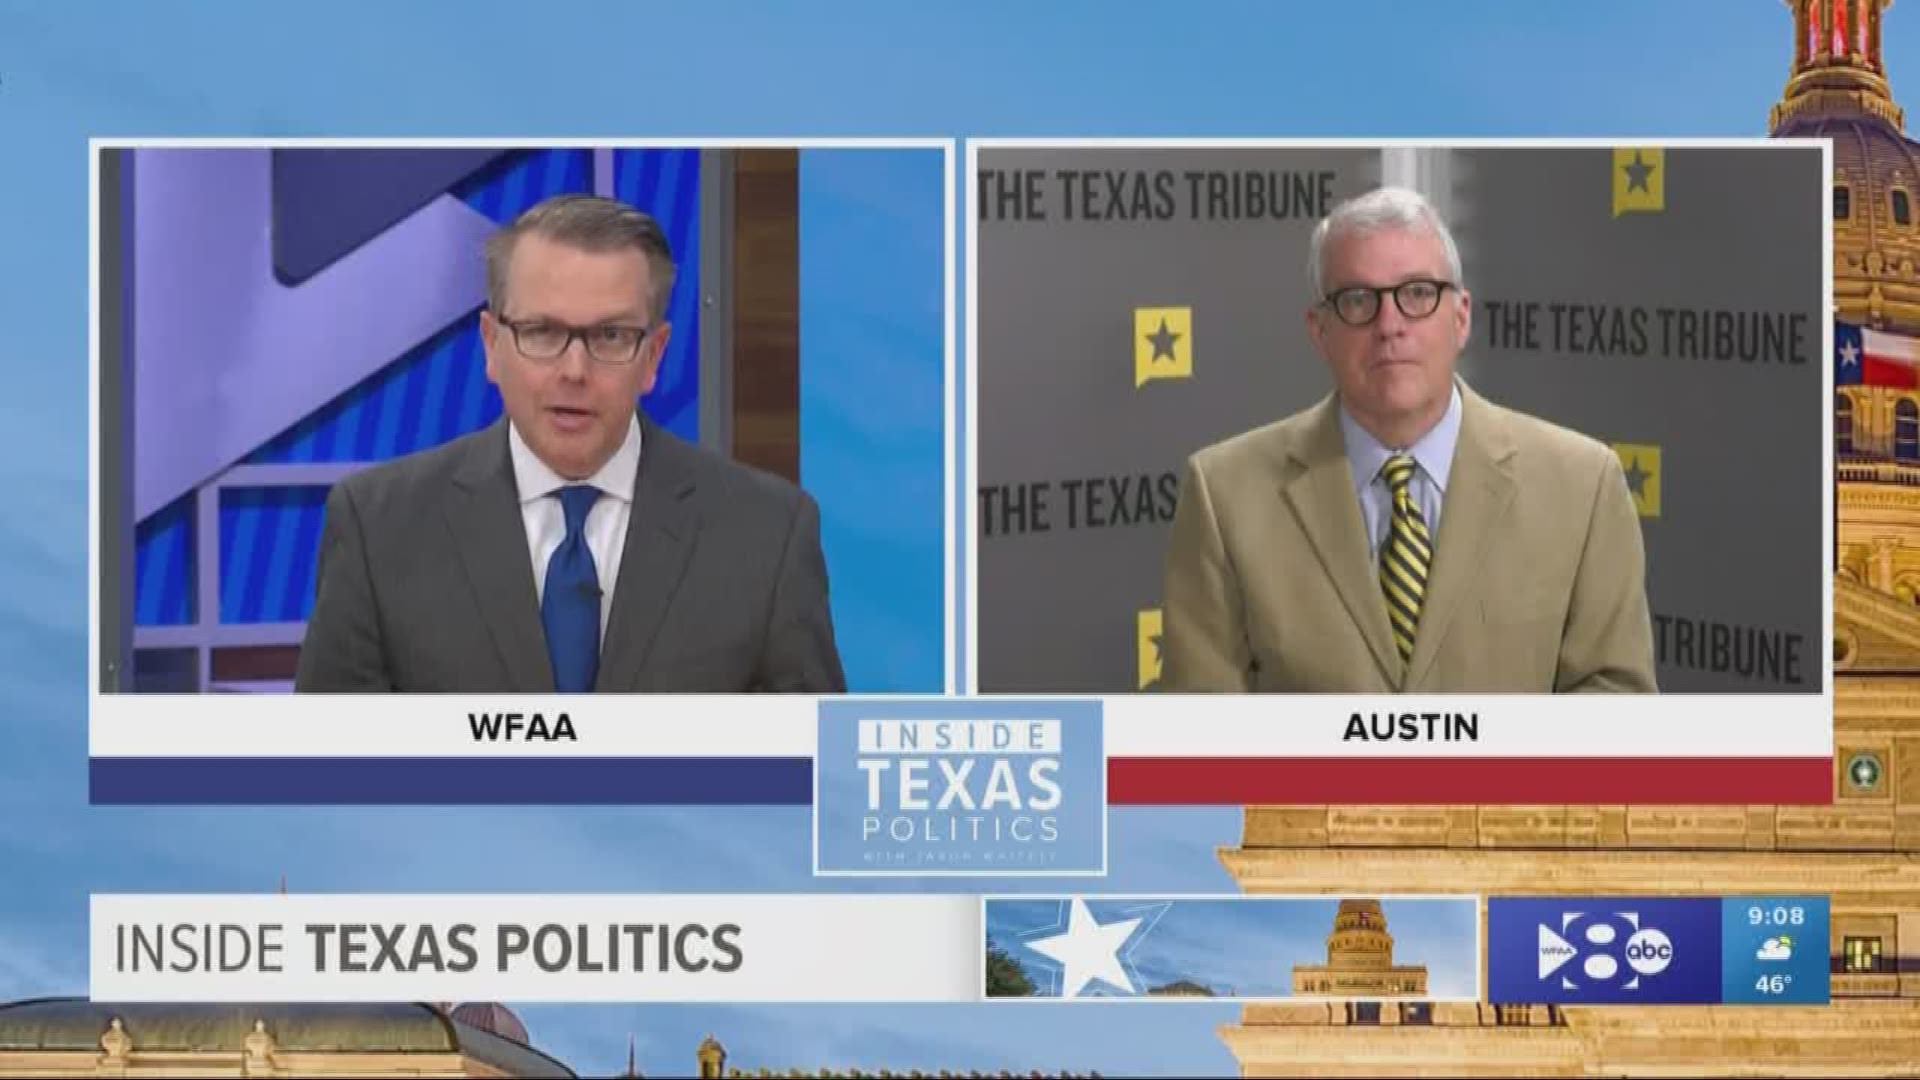 Ross Ramsey, the co-founder and executive editor of the Texas Tribune, joined Jason Whitely to give discuss why President Trump is giving Texas a lot of attention.